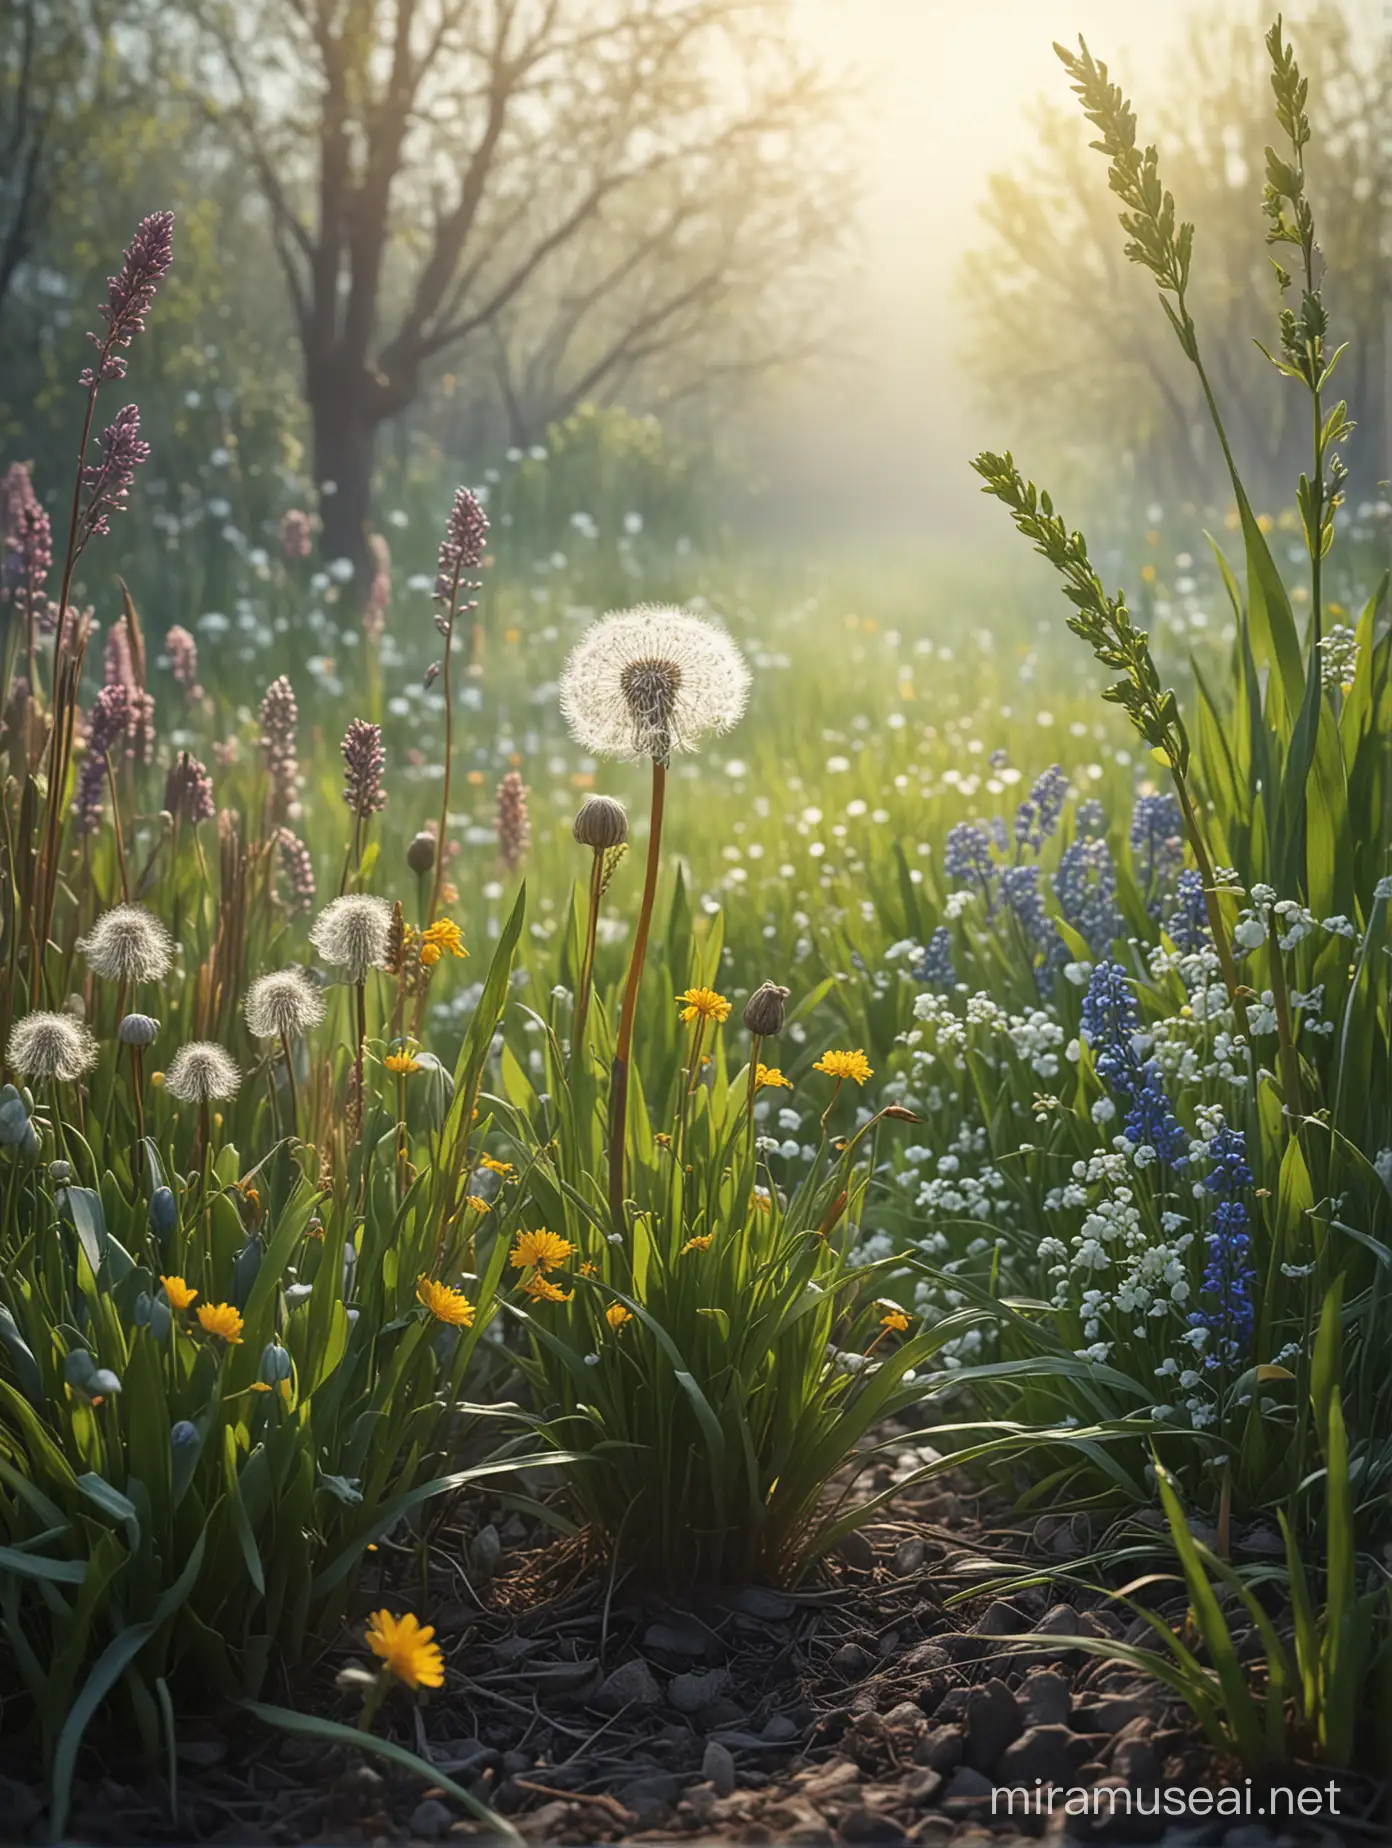 Enchanting Spring Meadow with Dandelions Hyacinths and Saffron